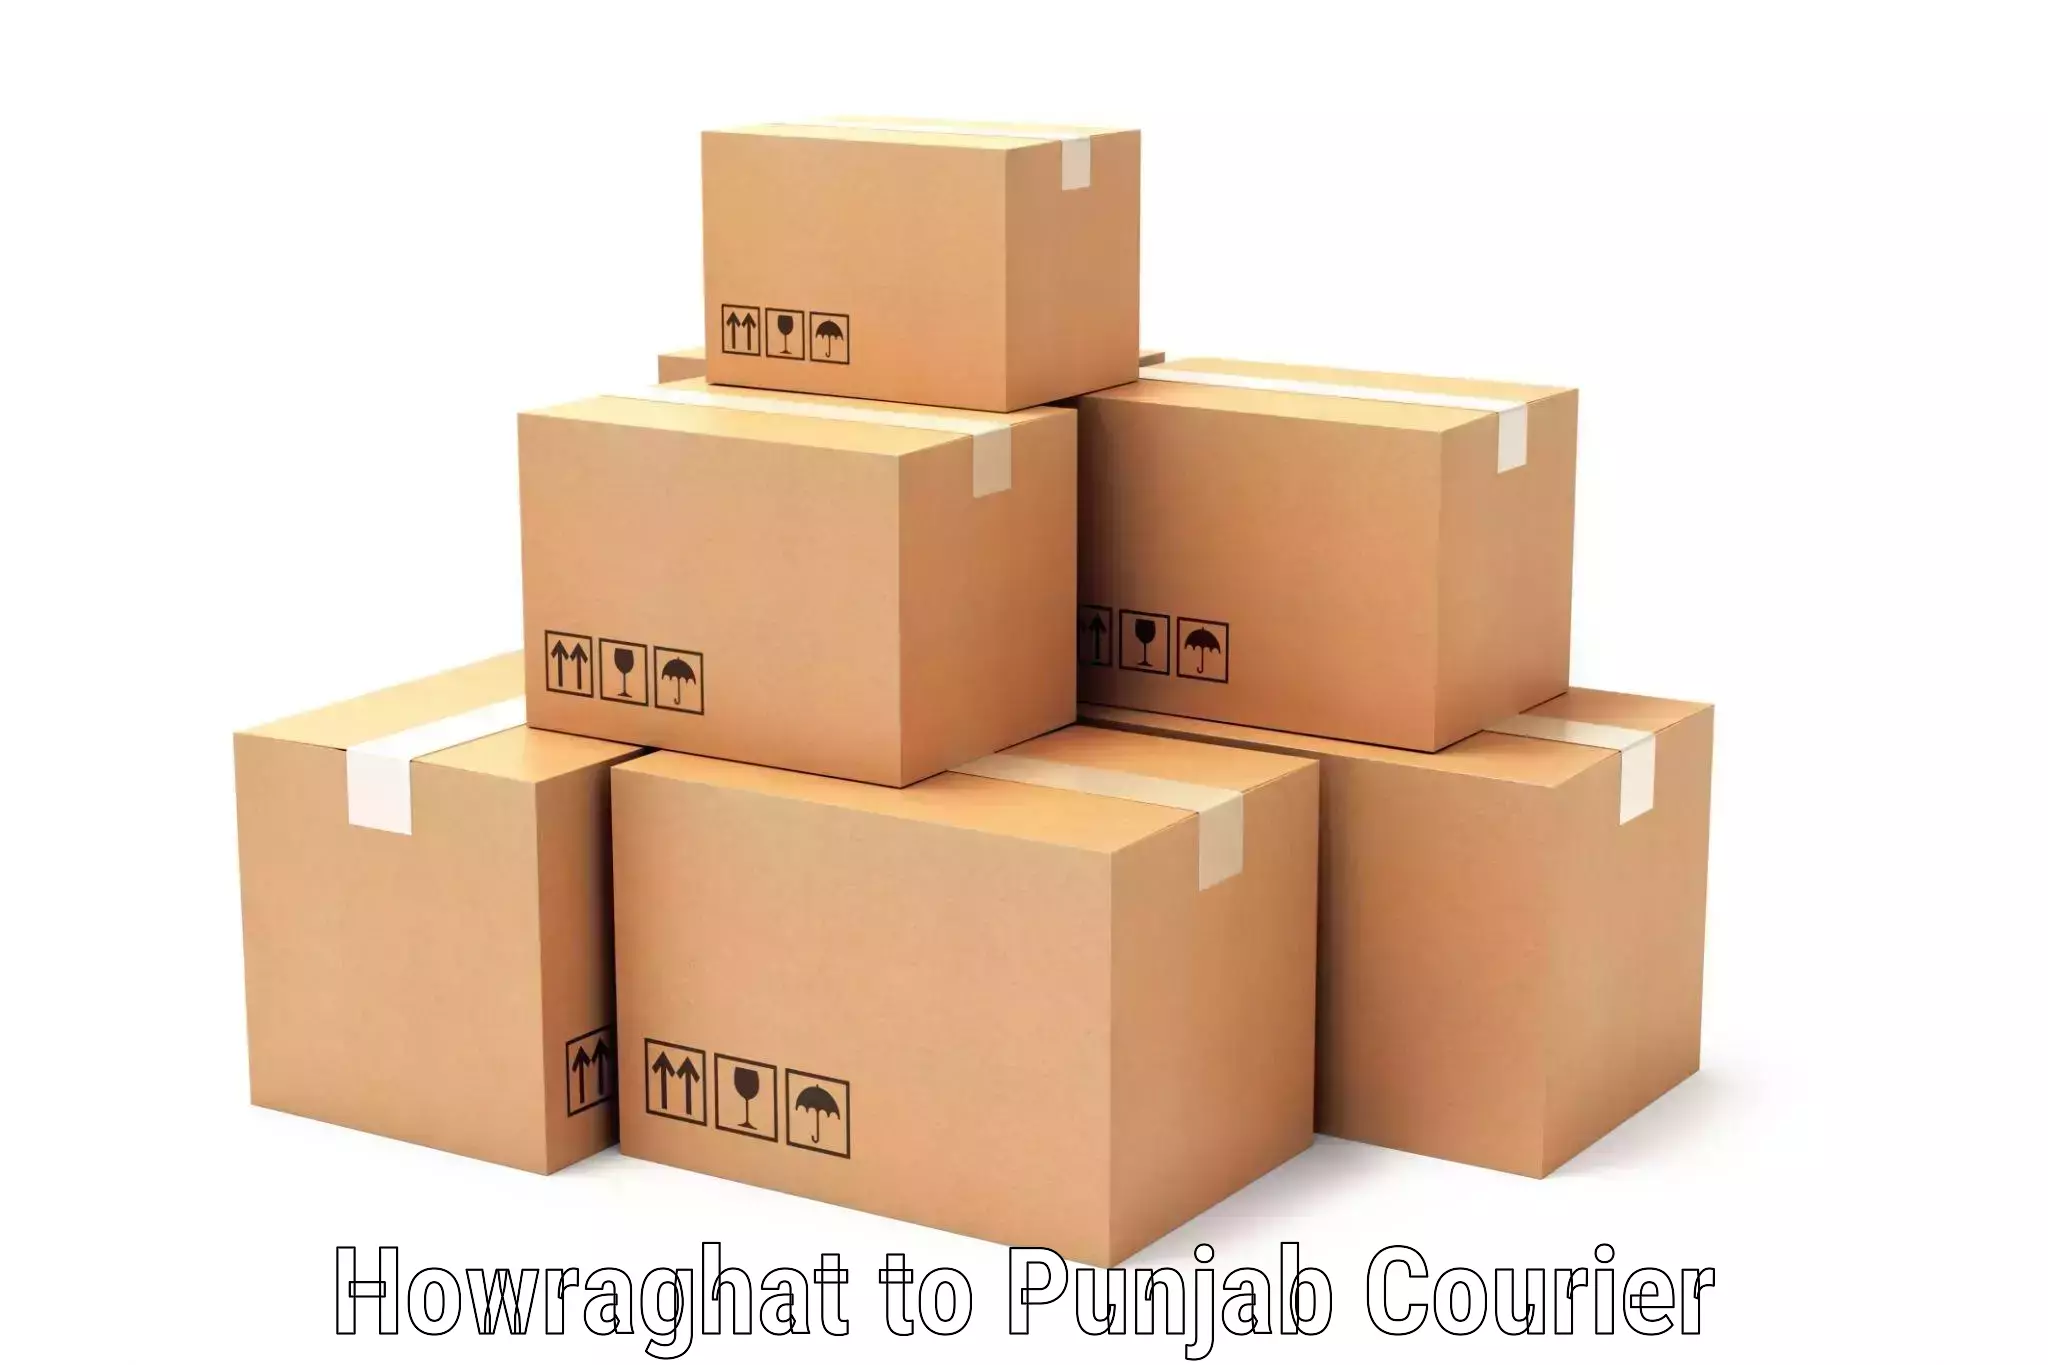 Personal parcel delivery Howraghat to Batala